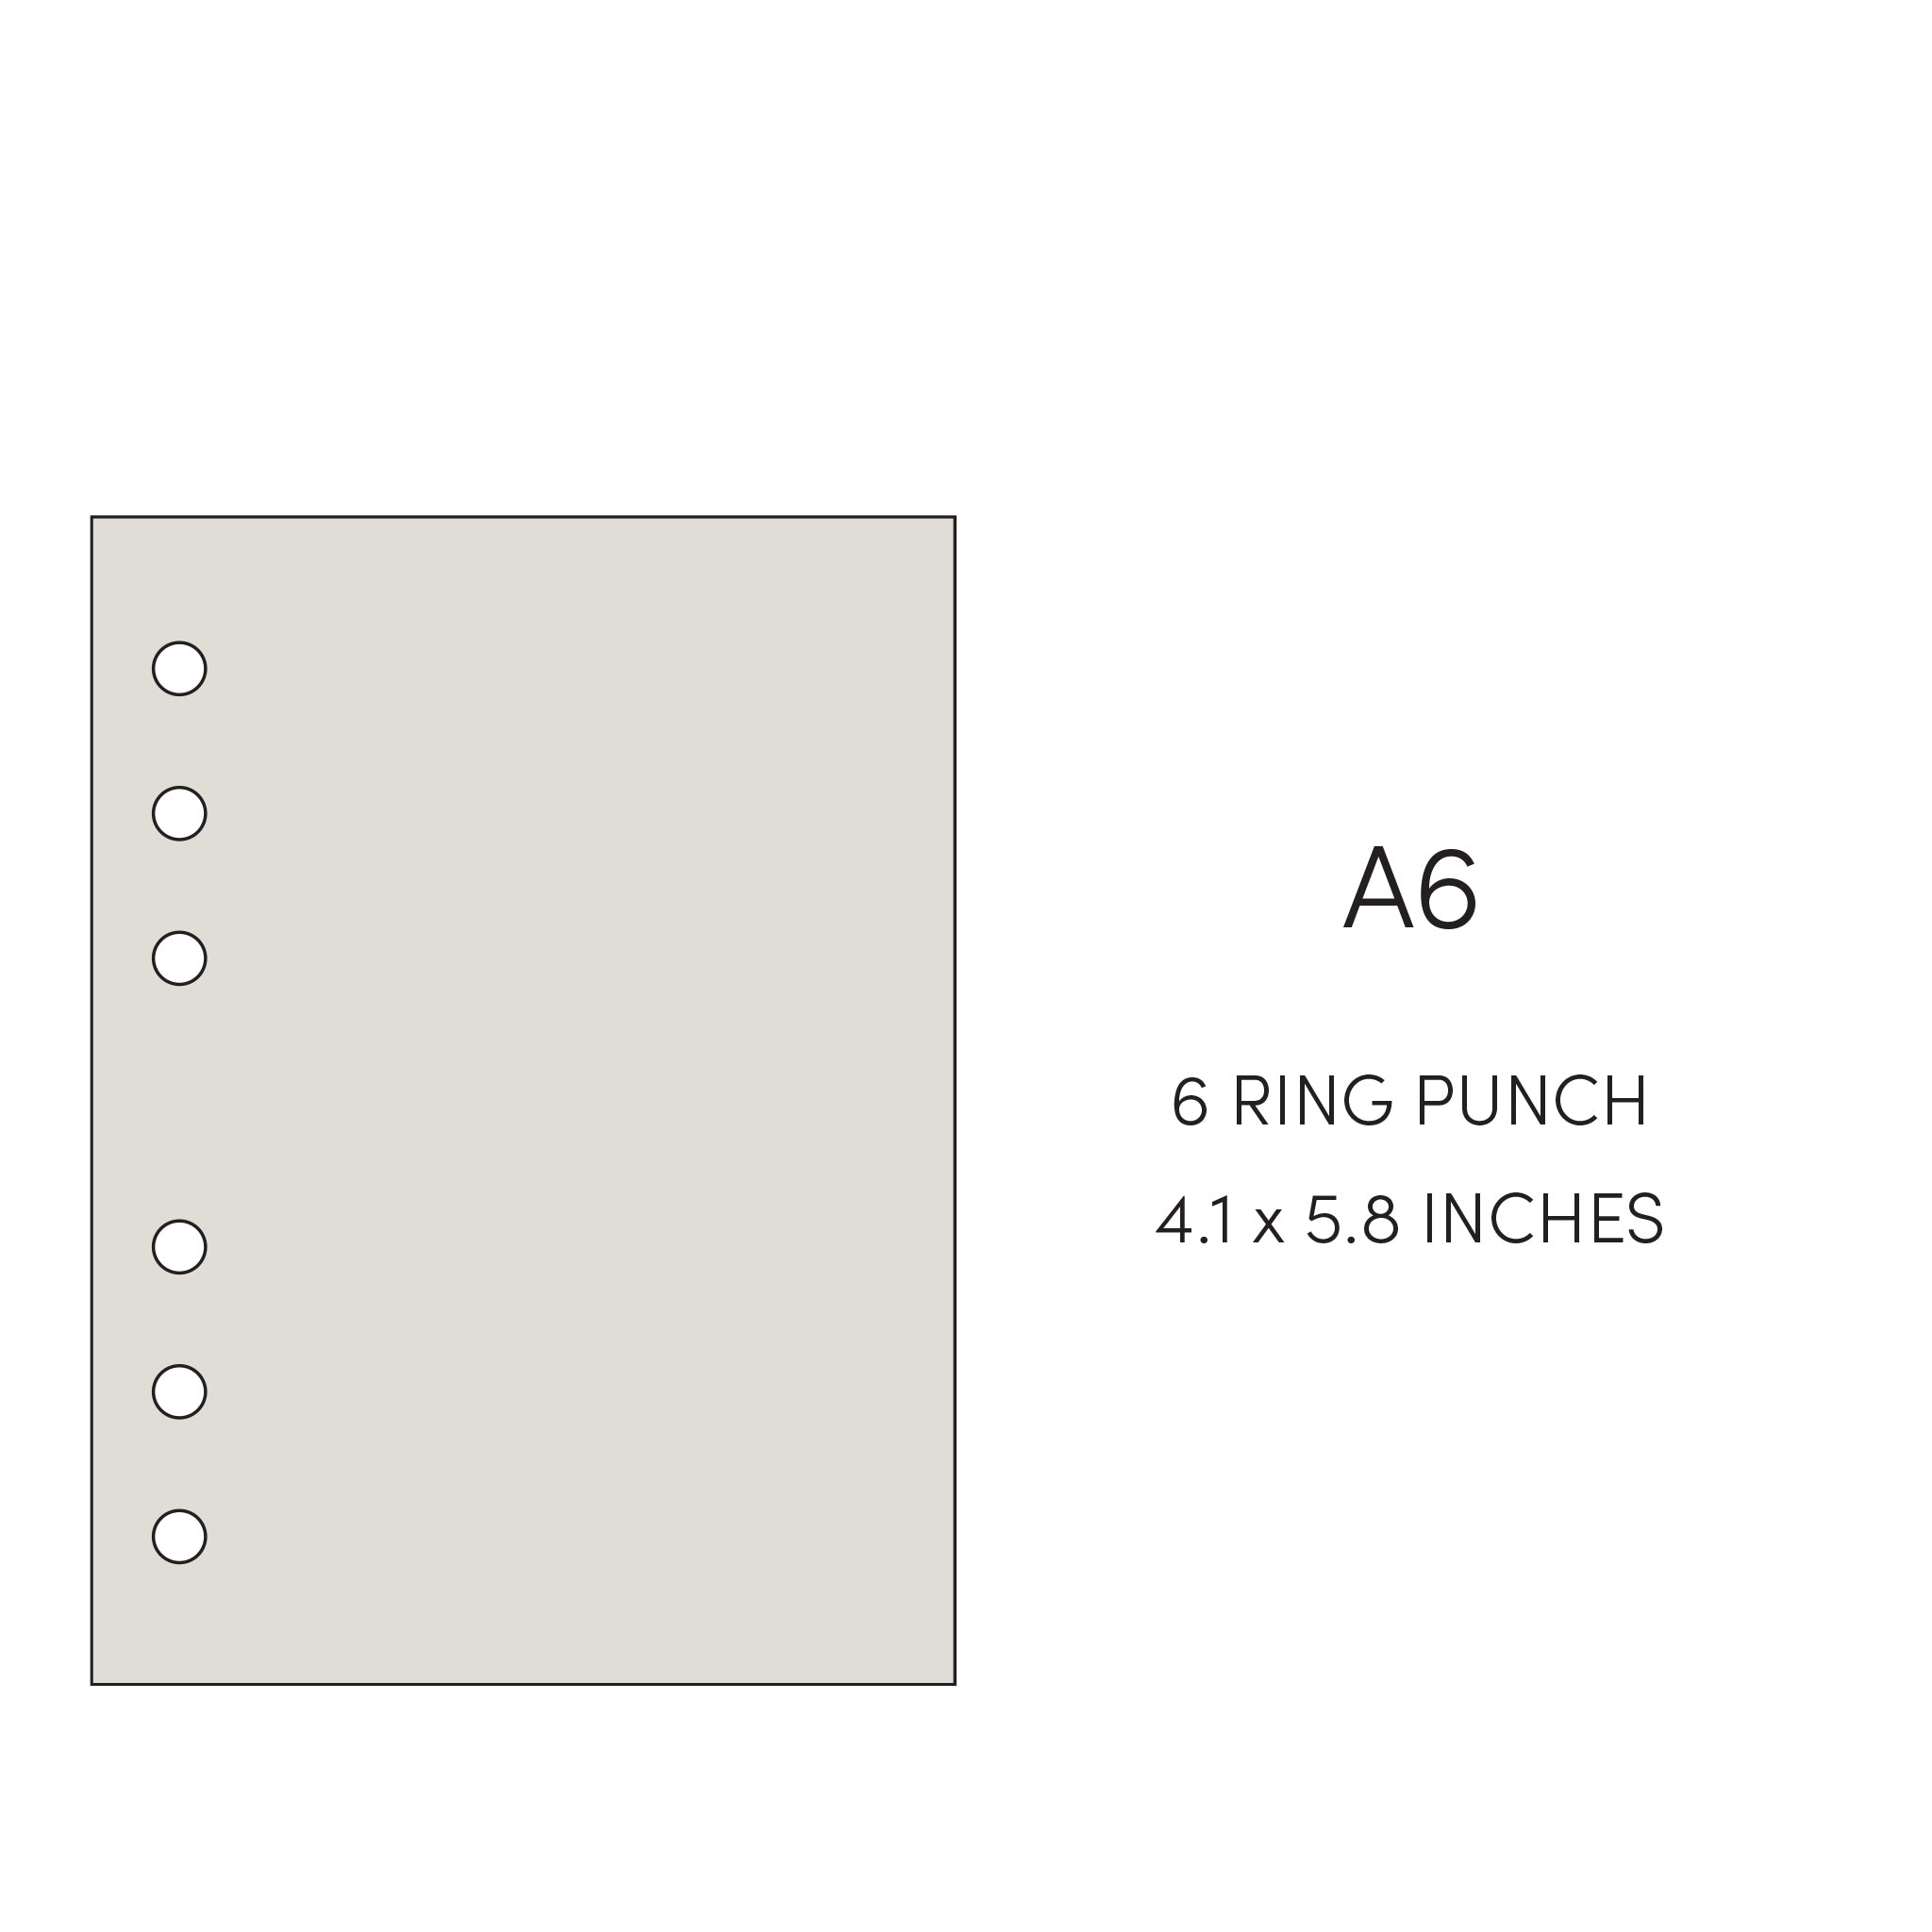 Cloth and Paper size guide - A6 - 4.1 x 5.8 inches